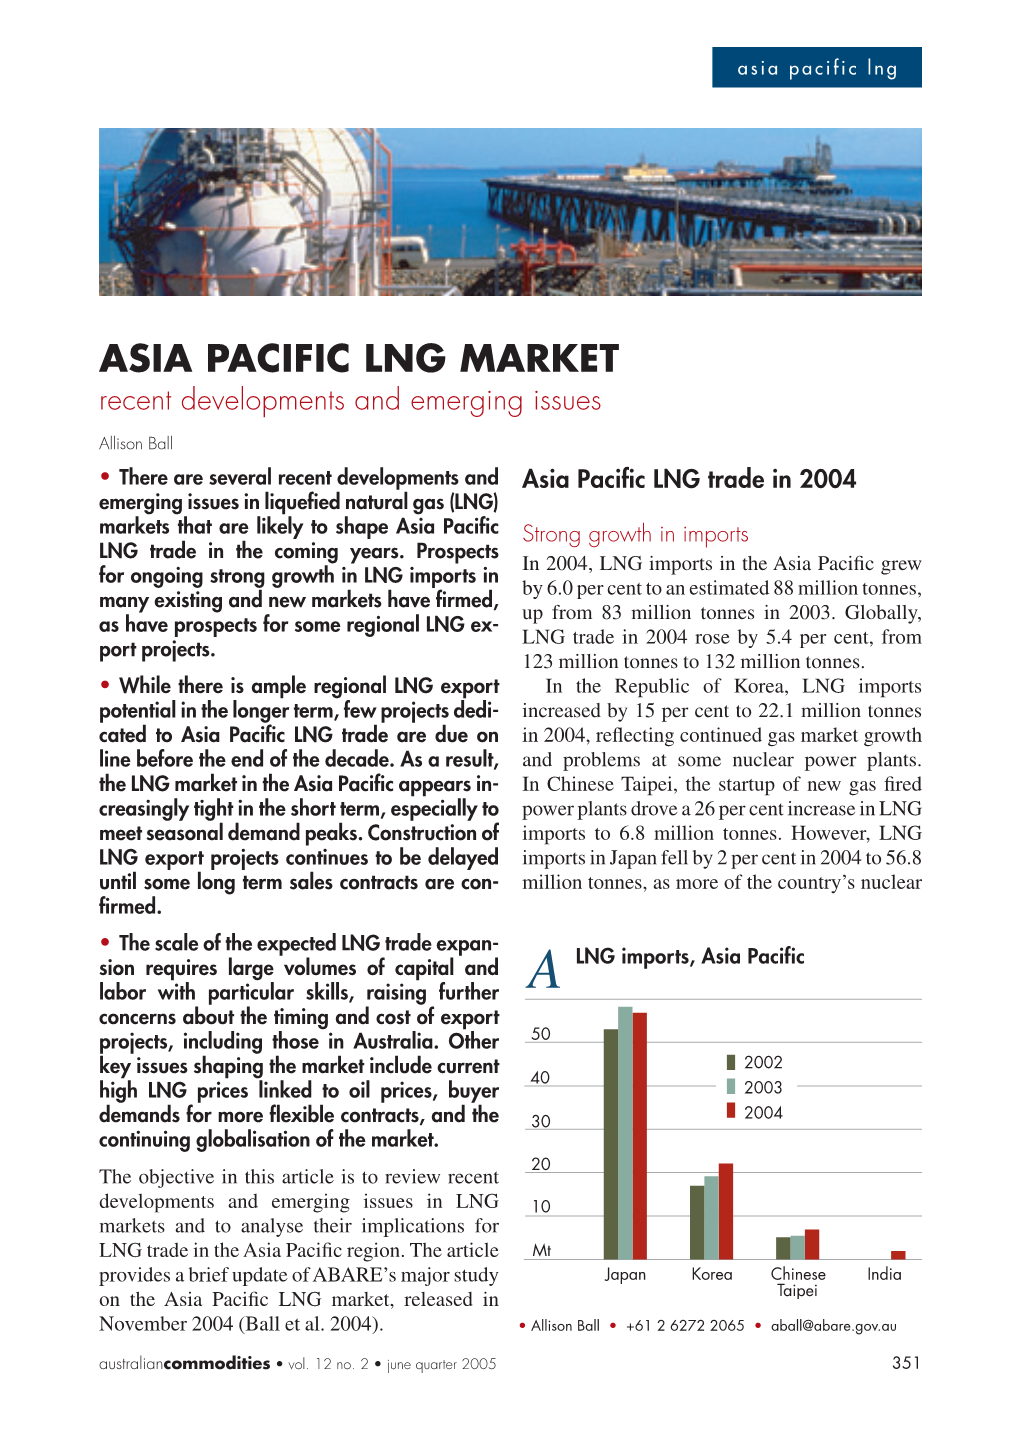 ASIA PACIFIC LNG MARKET Recent Developments and Emerging Issues